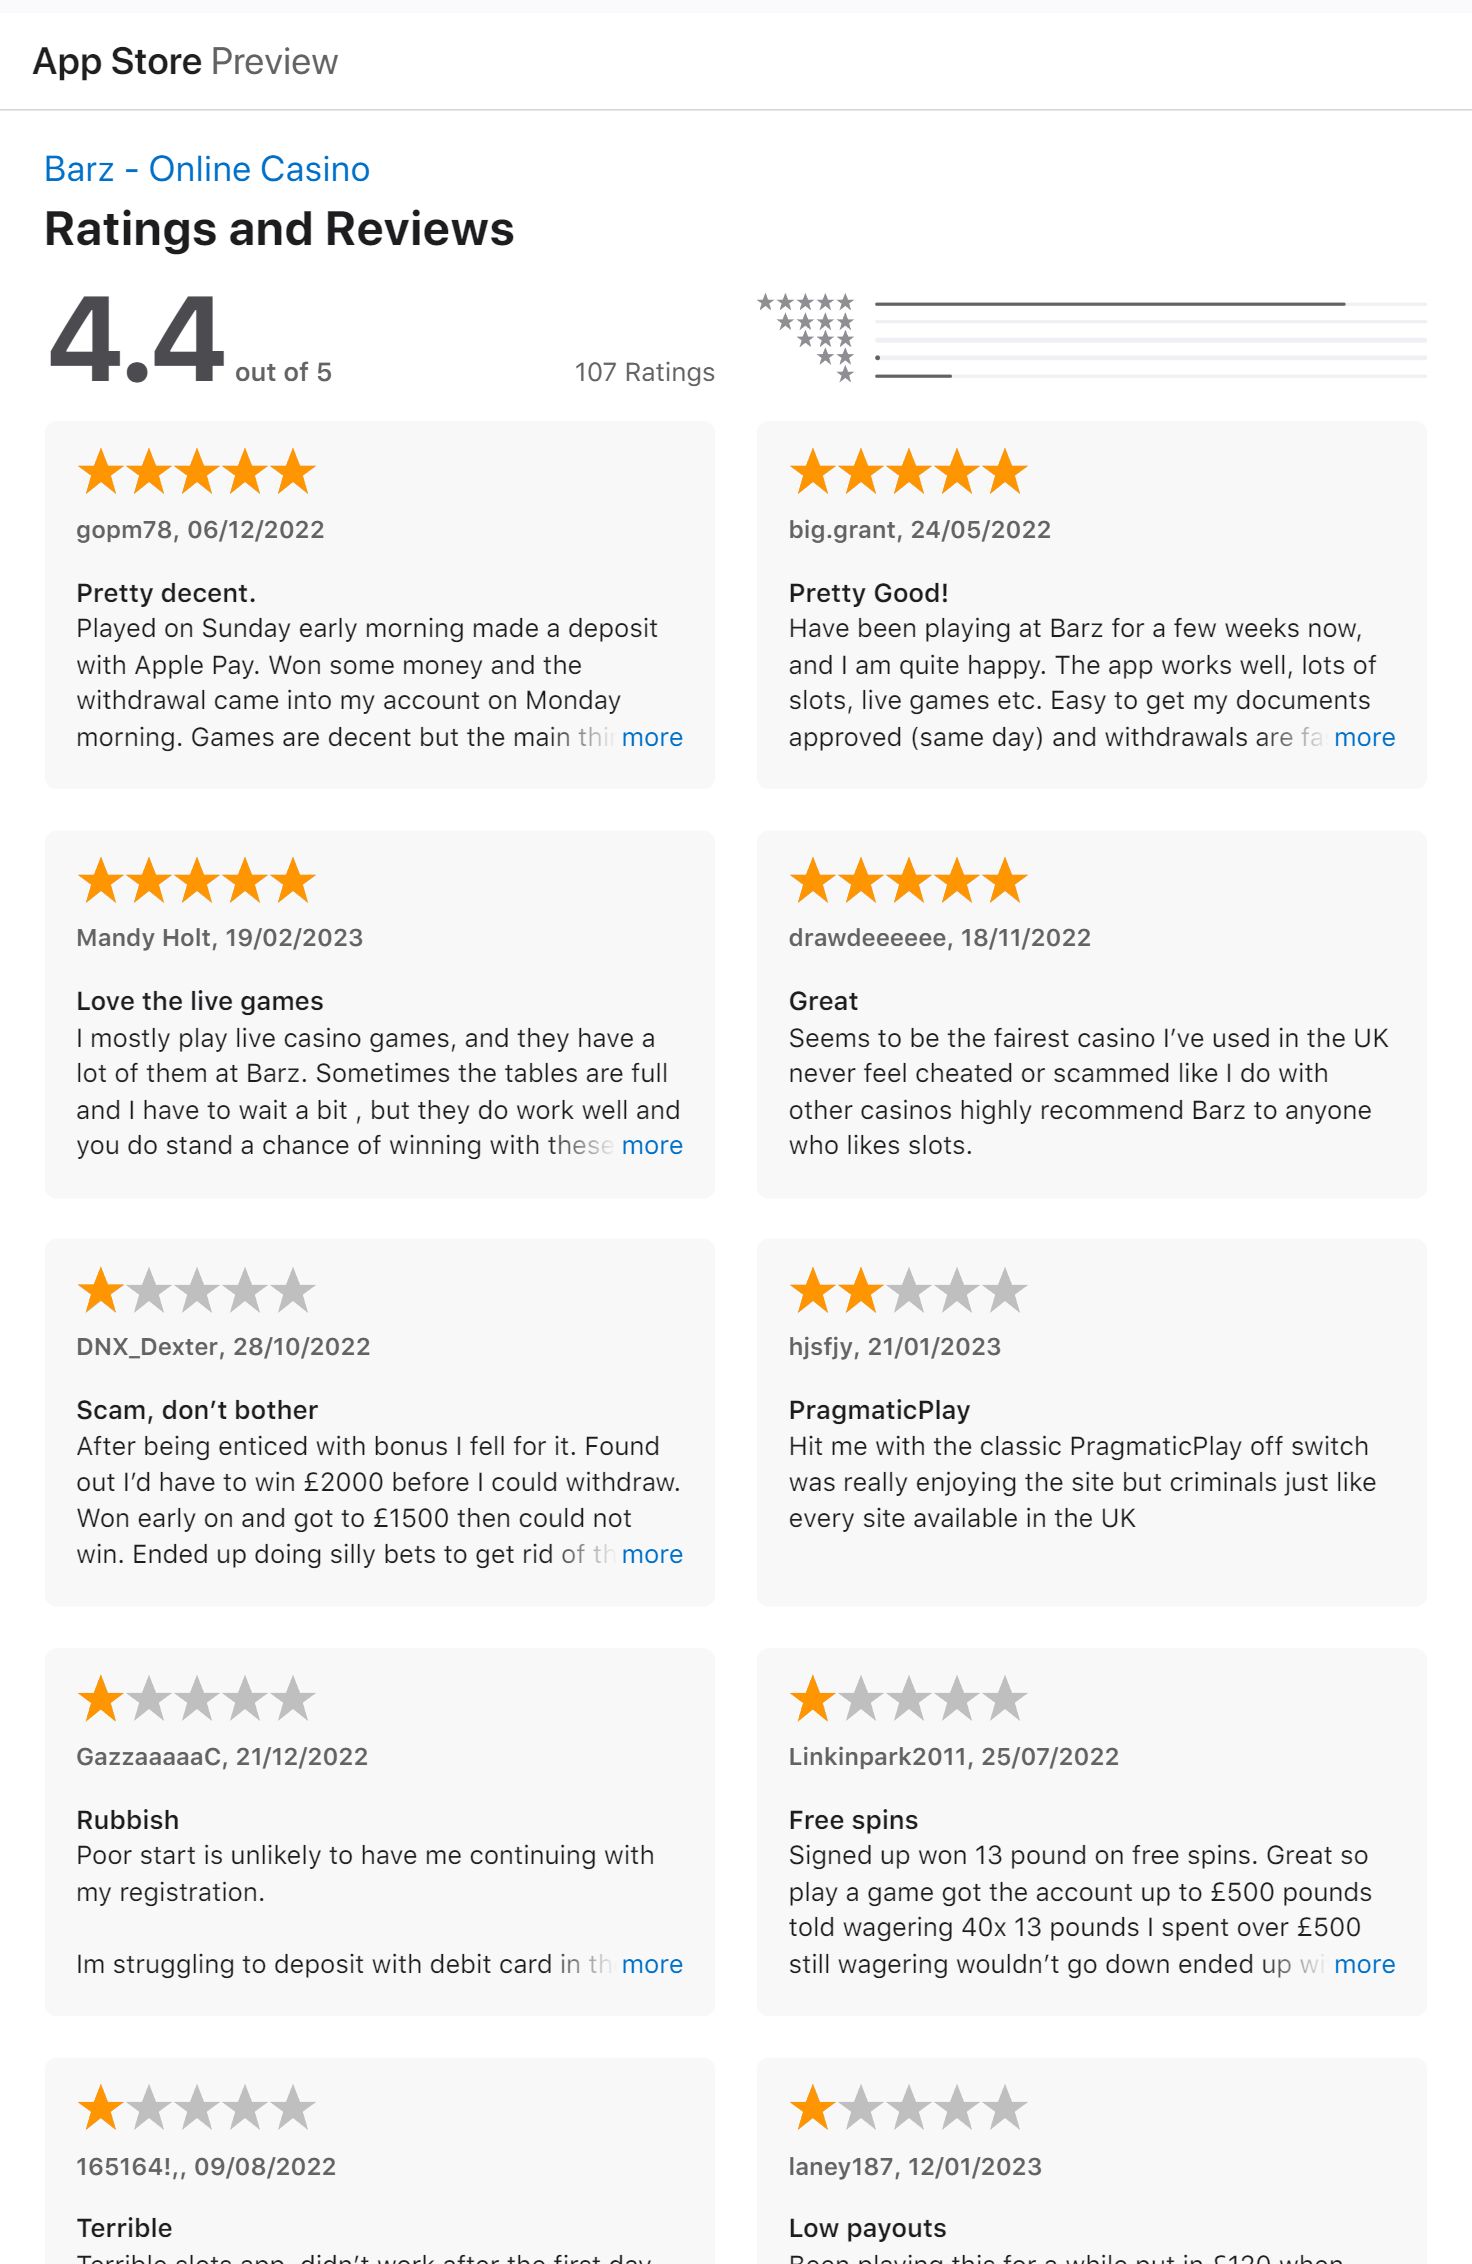 Apple App store ratings and reviews for the Barz